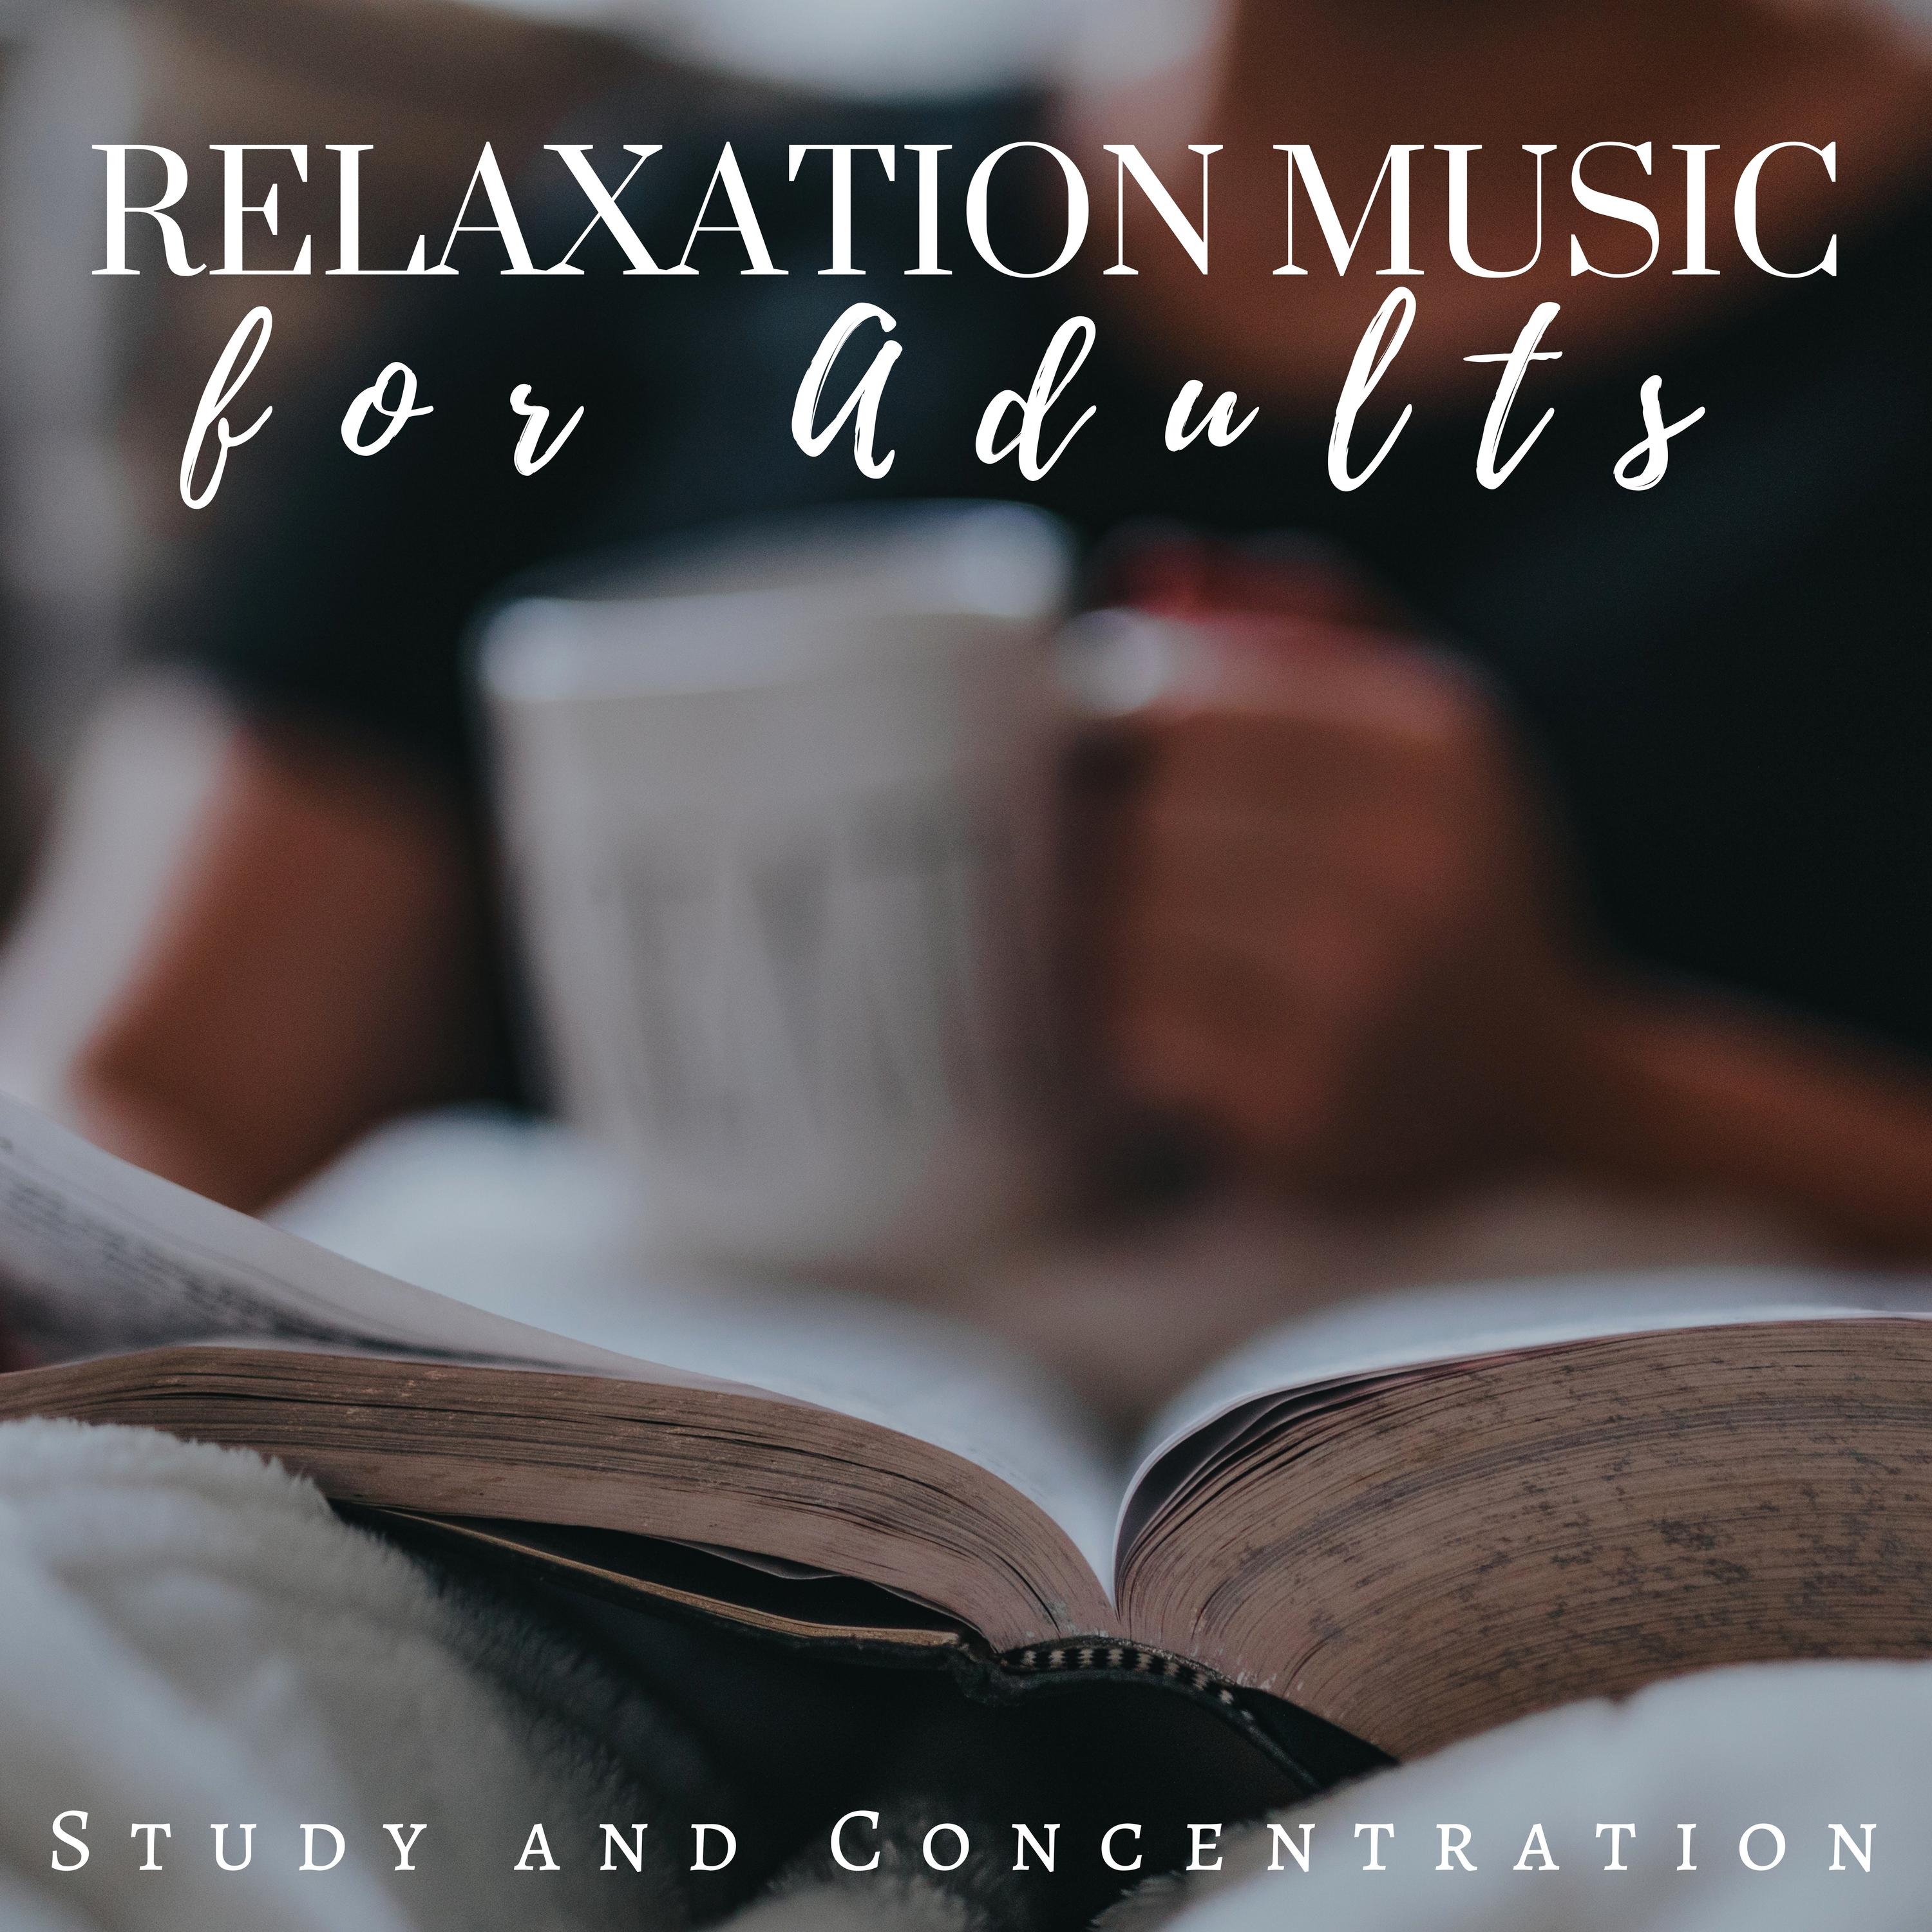 Relaxation Music CDs for Adults - Study and Concentration Playlist